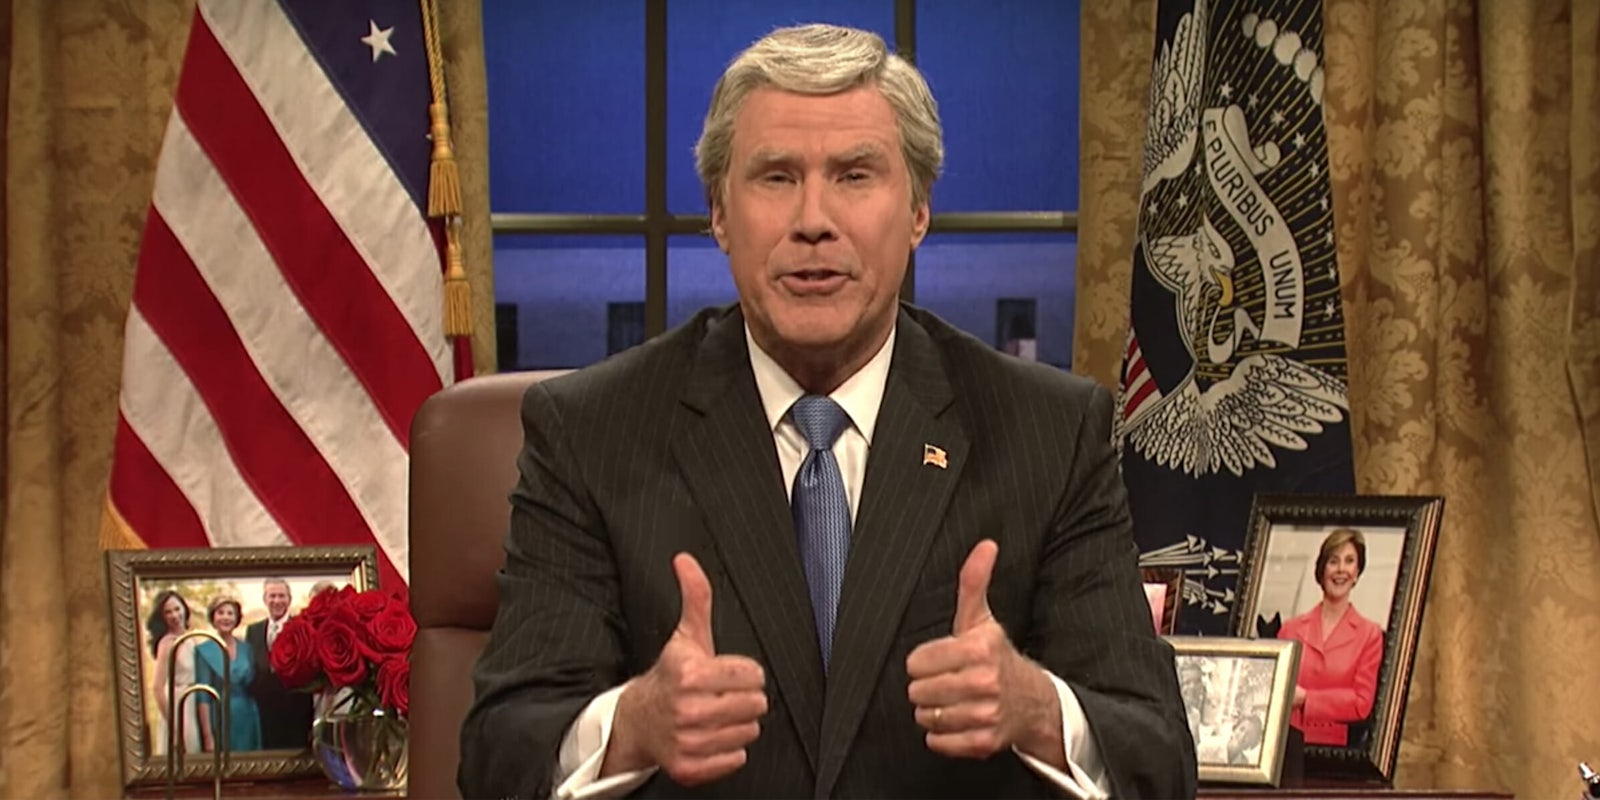 Will Ferrell revived his role as George W. Bush on 'Saturday Night Live.'